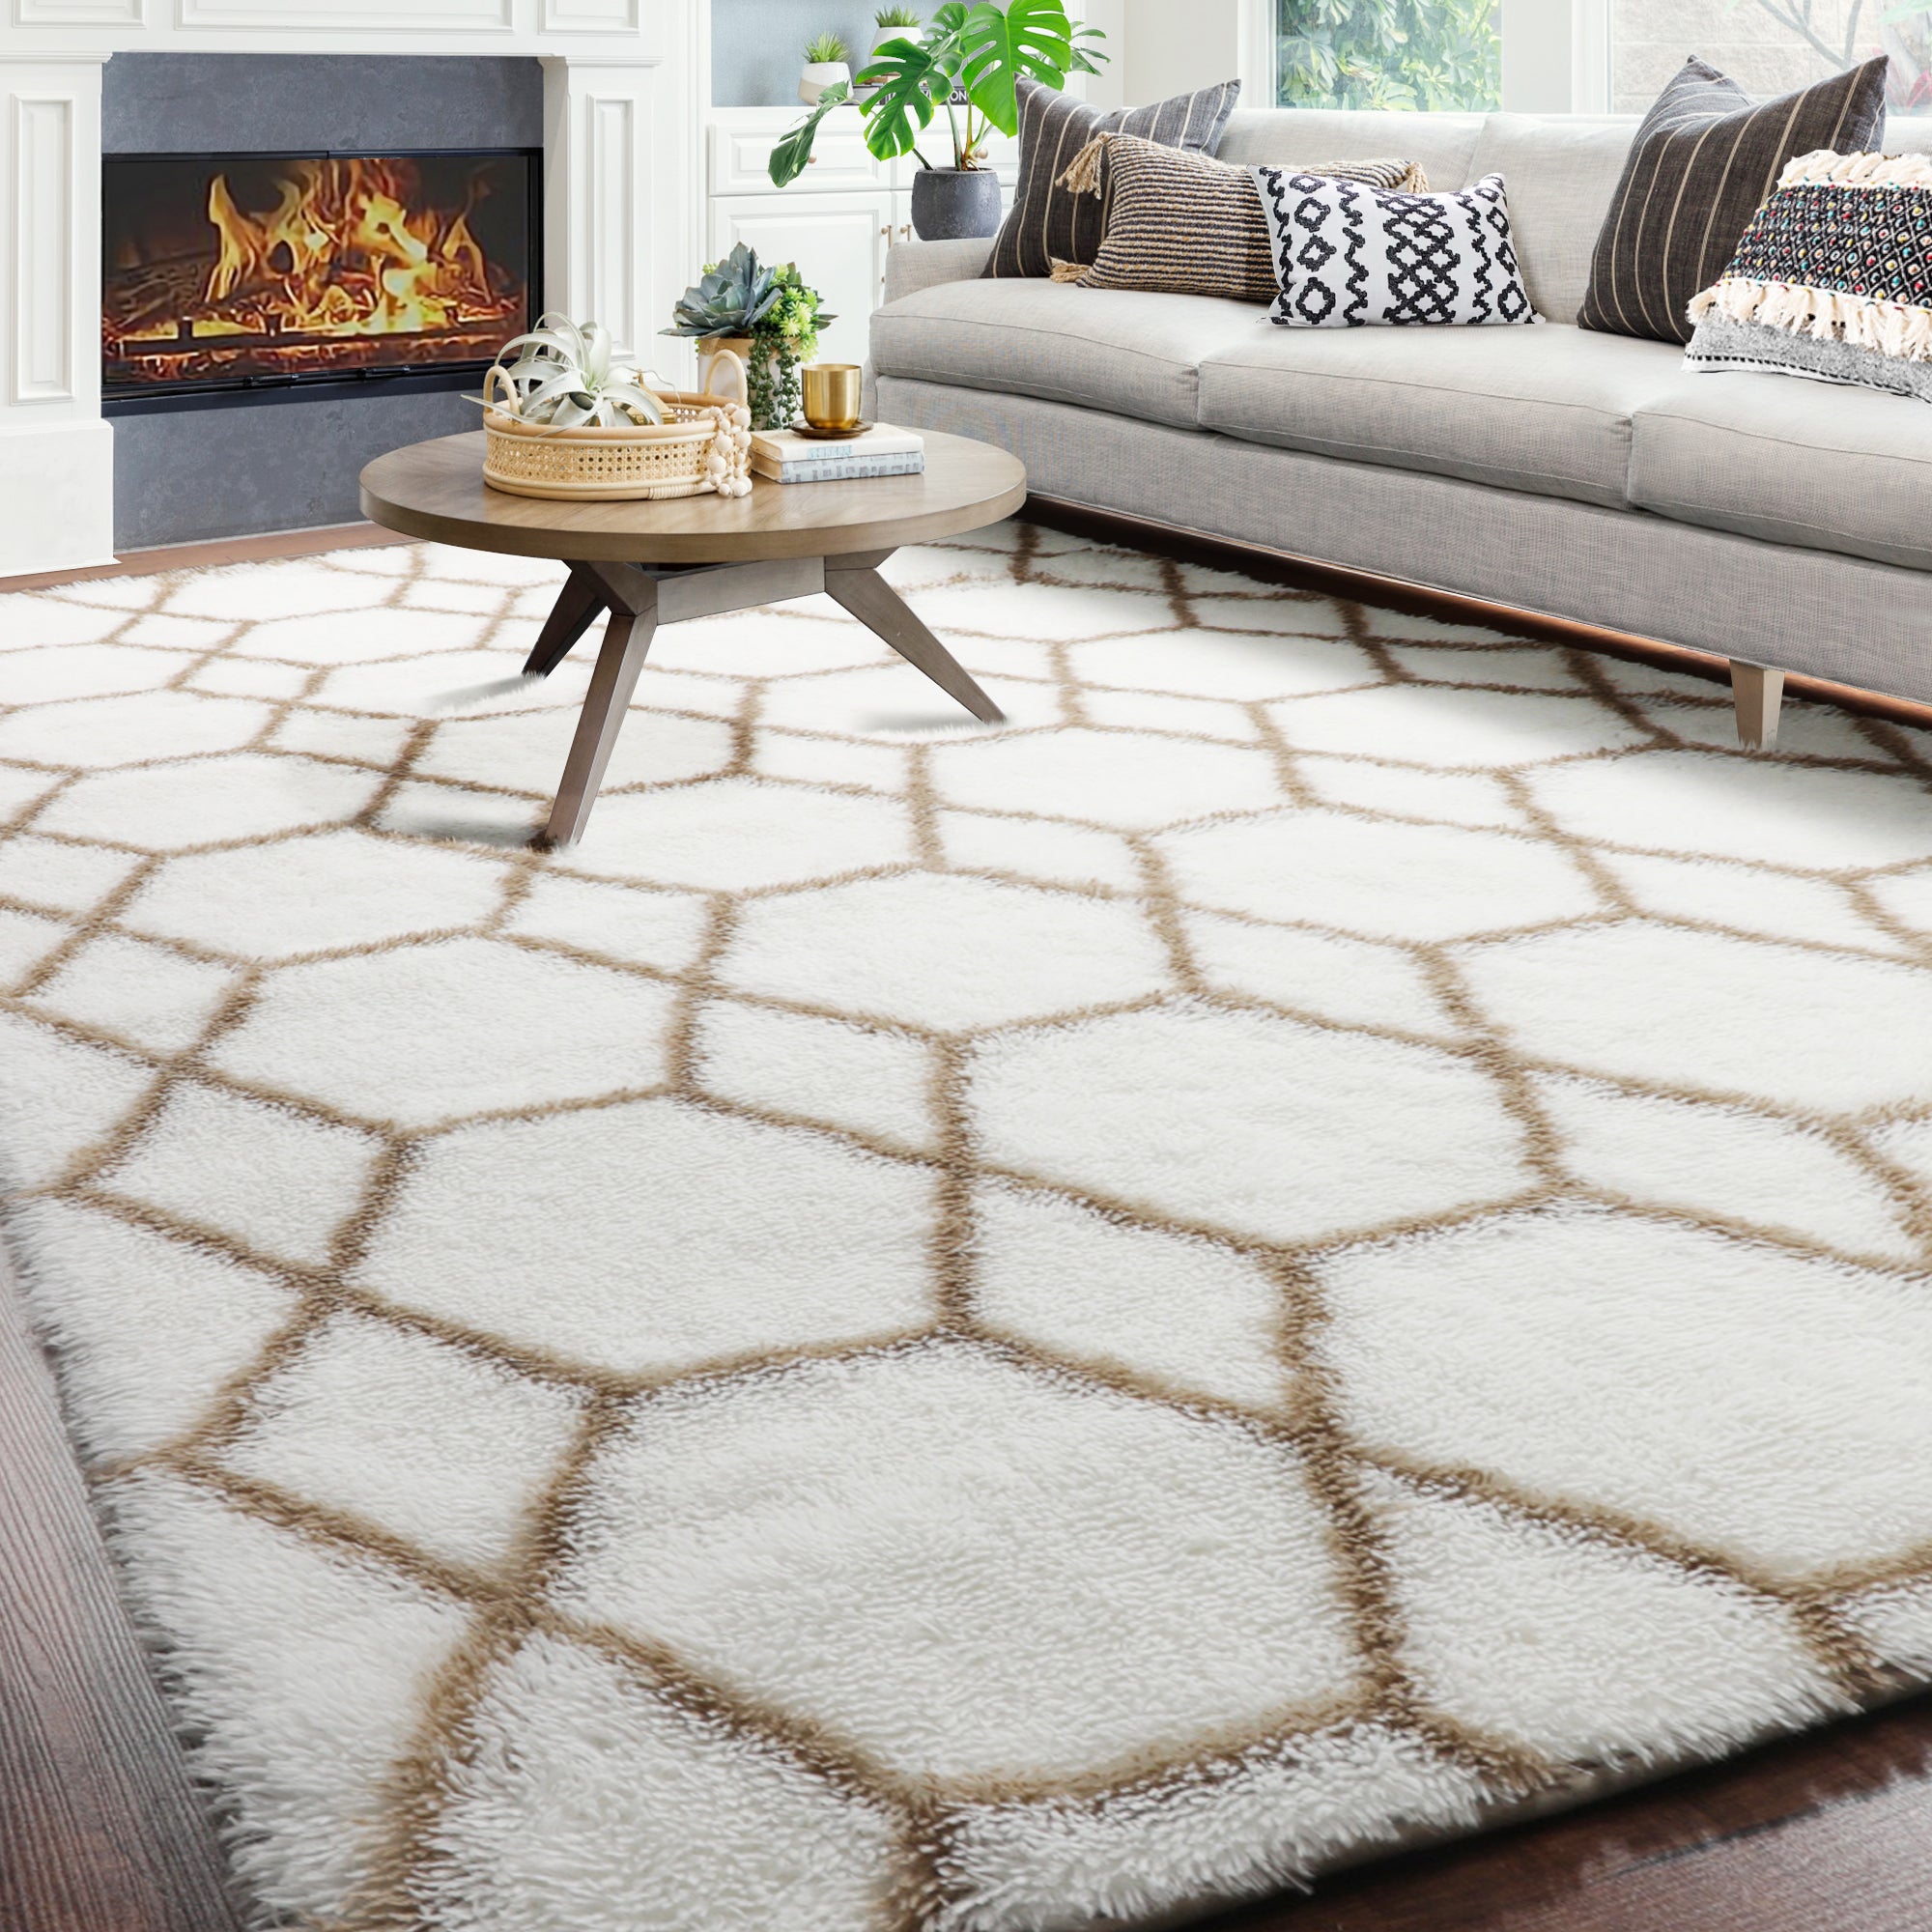 Cute Boho Area Rug for Living Room Aesthetic, White and Beige Rug, Moroccan Shag Fluffy Rug